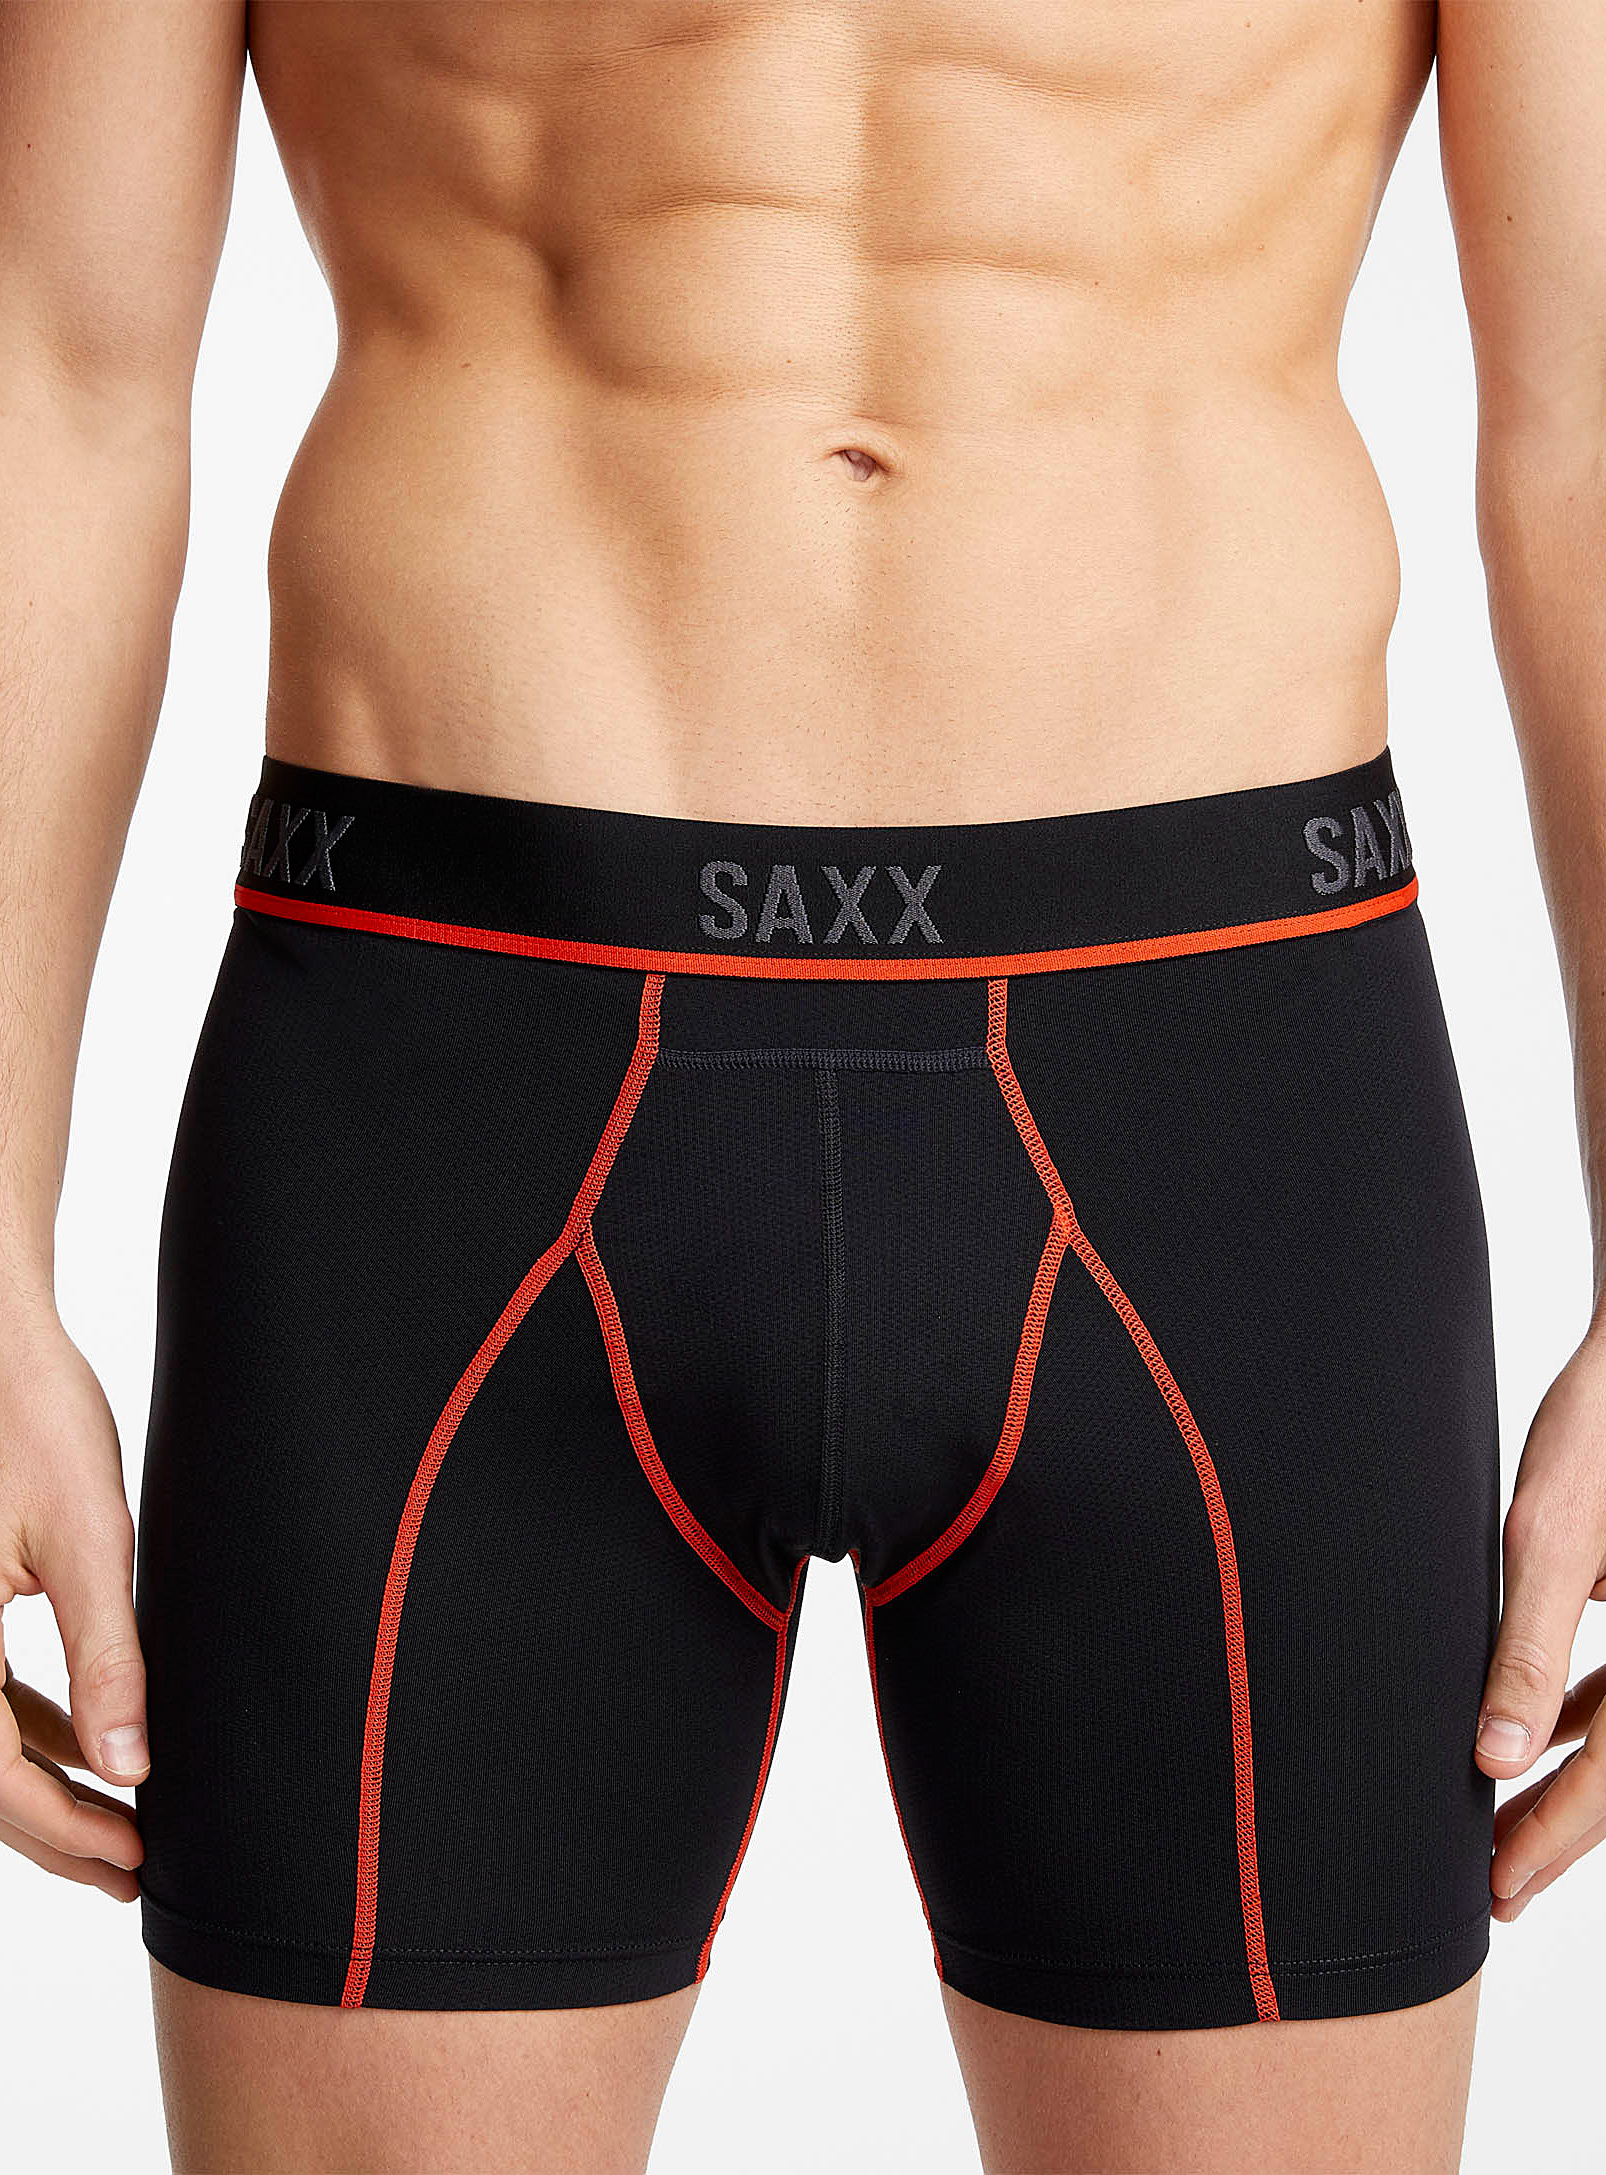 Saxx Piping Micro-mesh Boxer Brief Kinetic Hd In Patterned Black